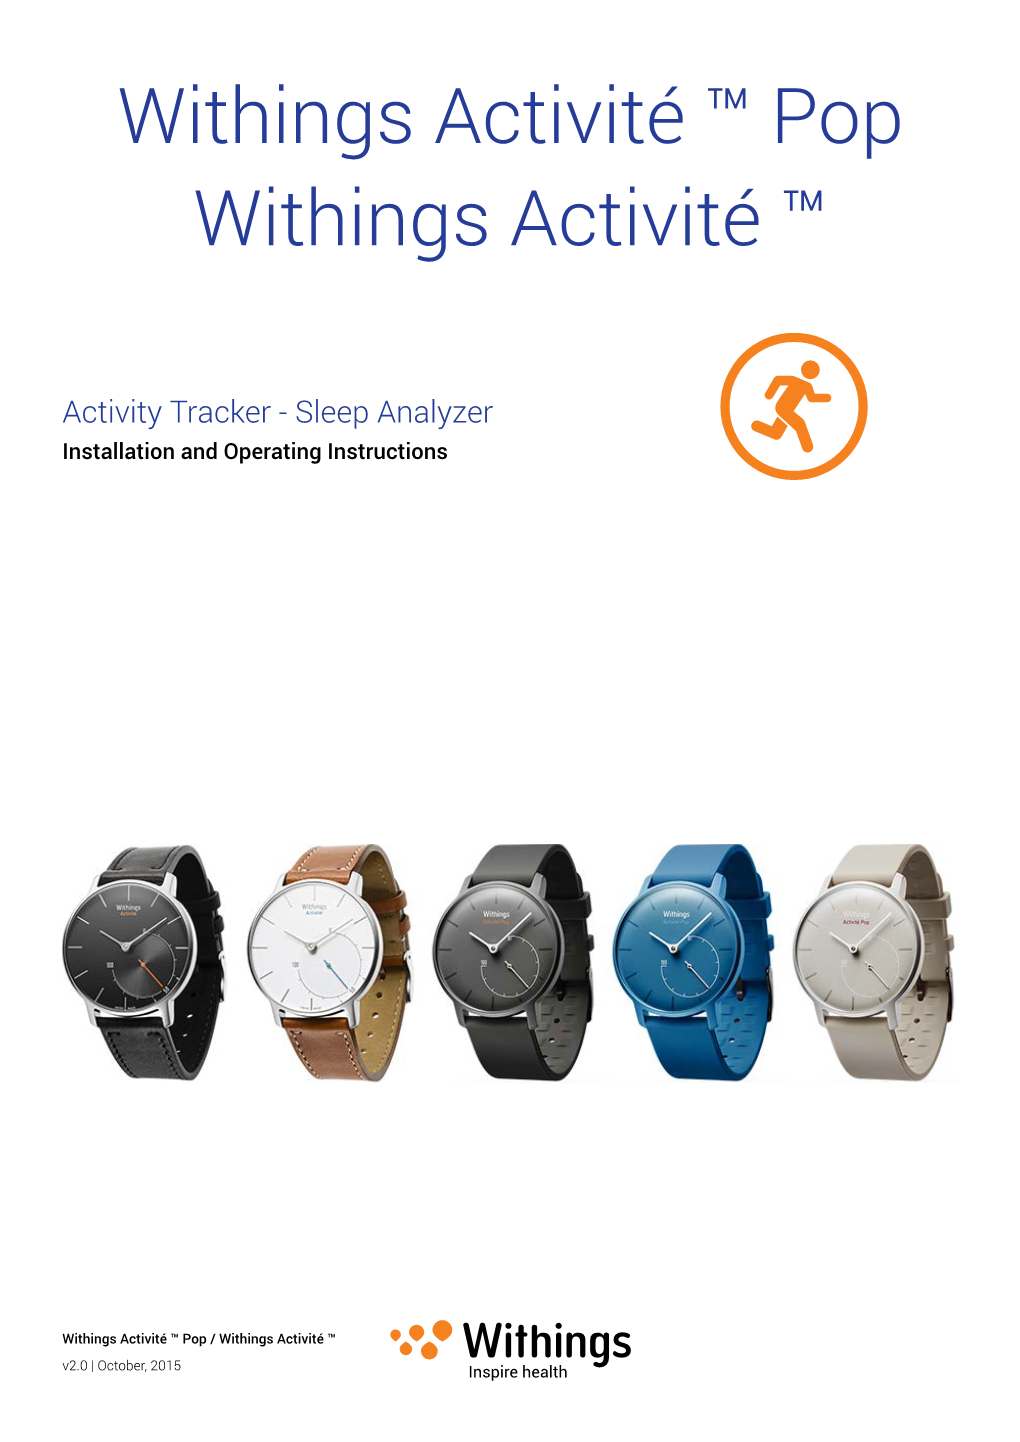 Withings Activité ™ Pop Withings Activité ™